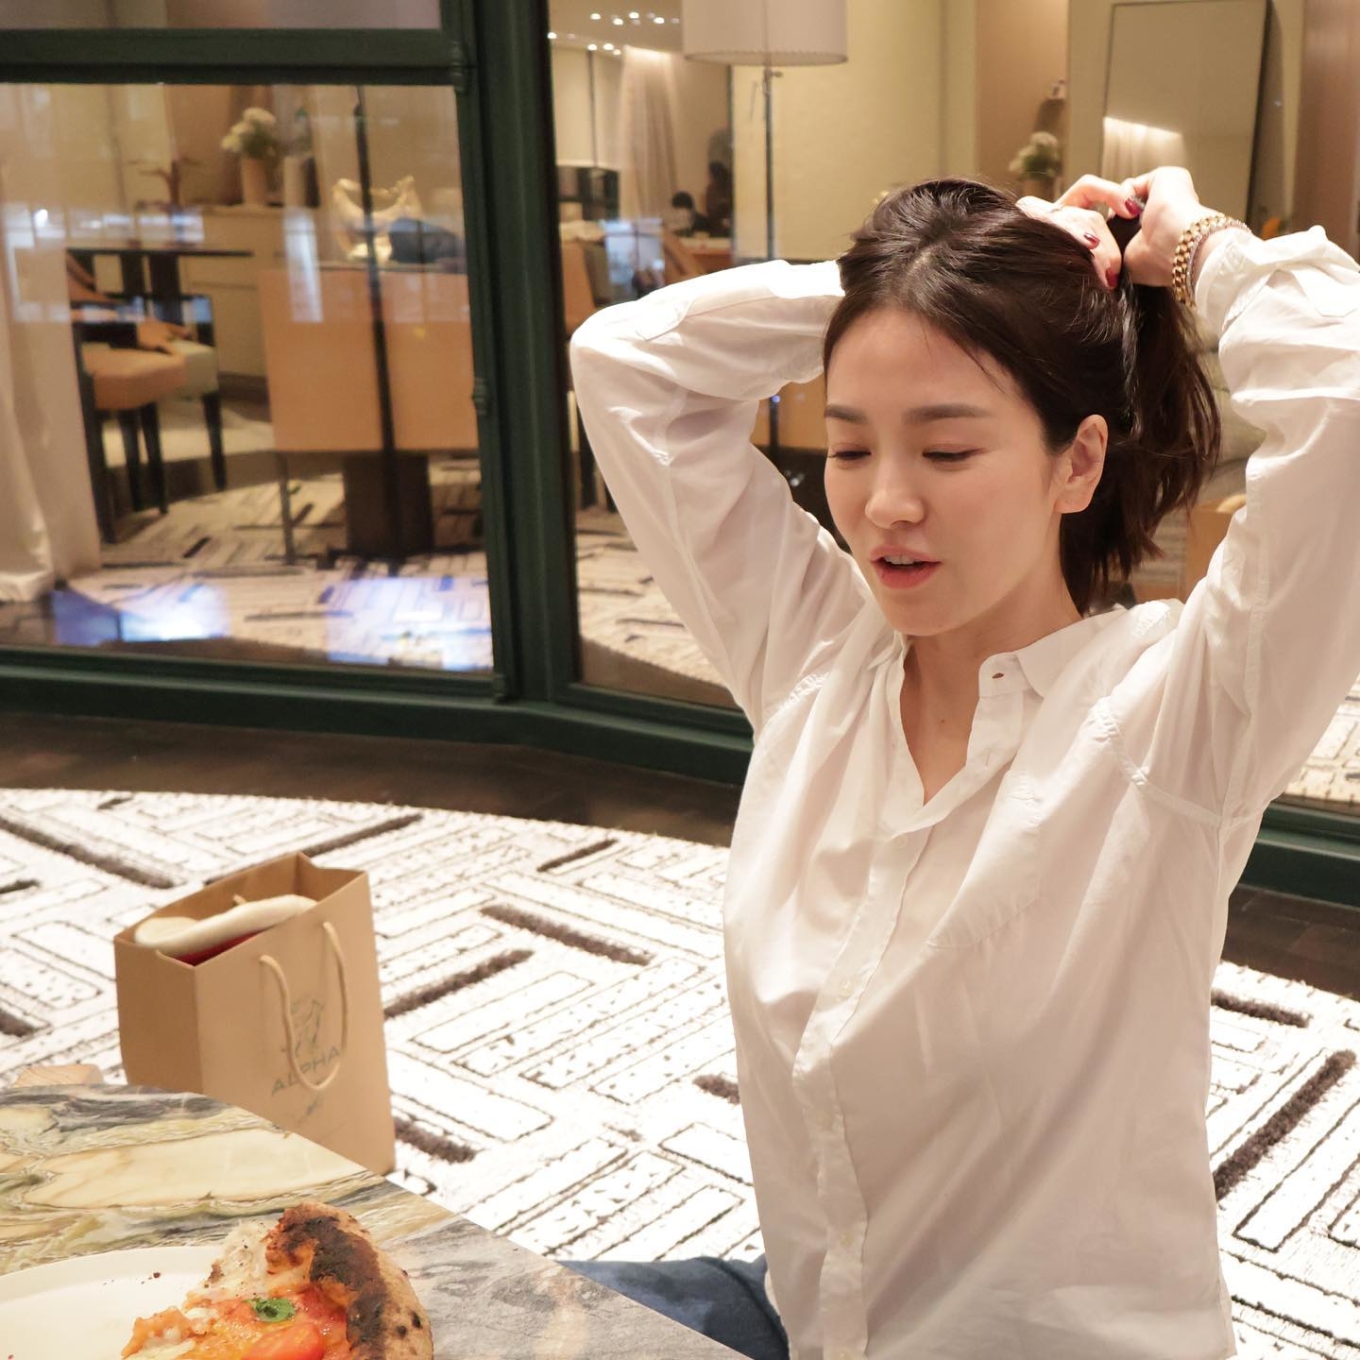 South Korean actress Song Hye Kyo dines in Paris luxury restaurant